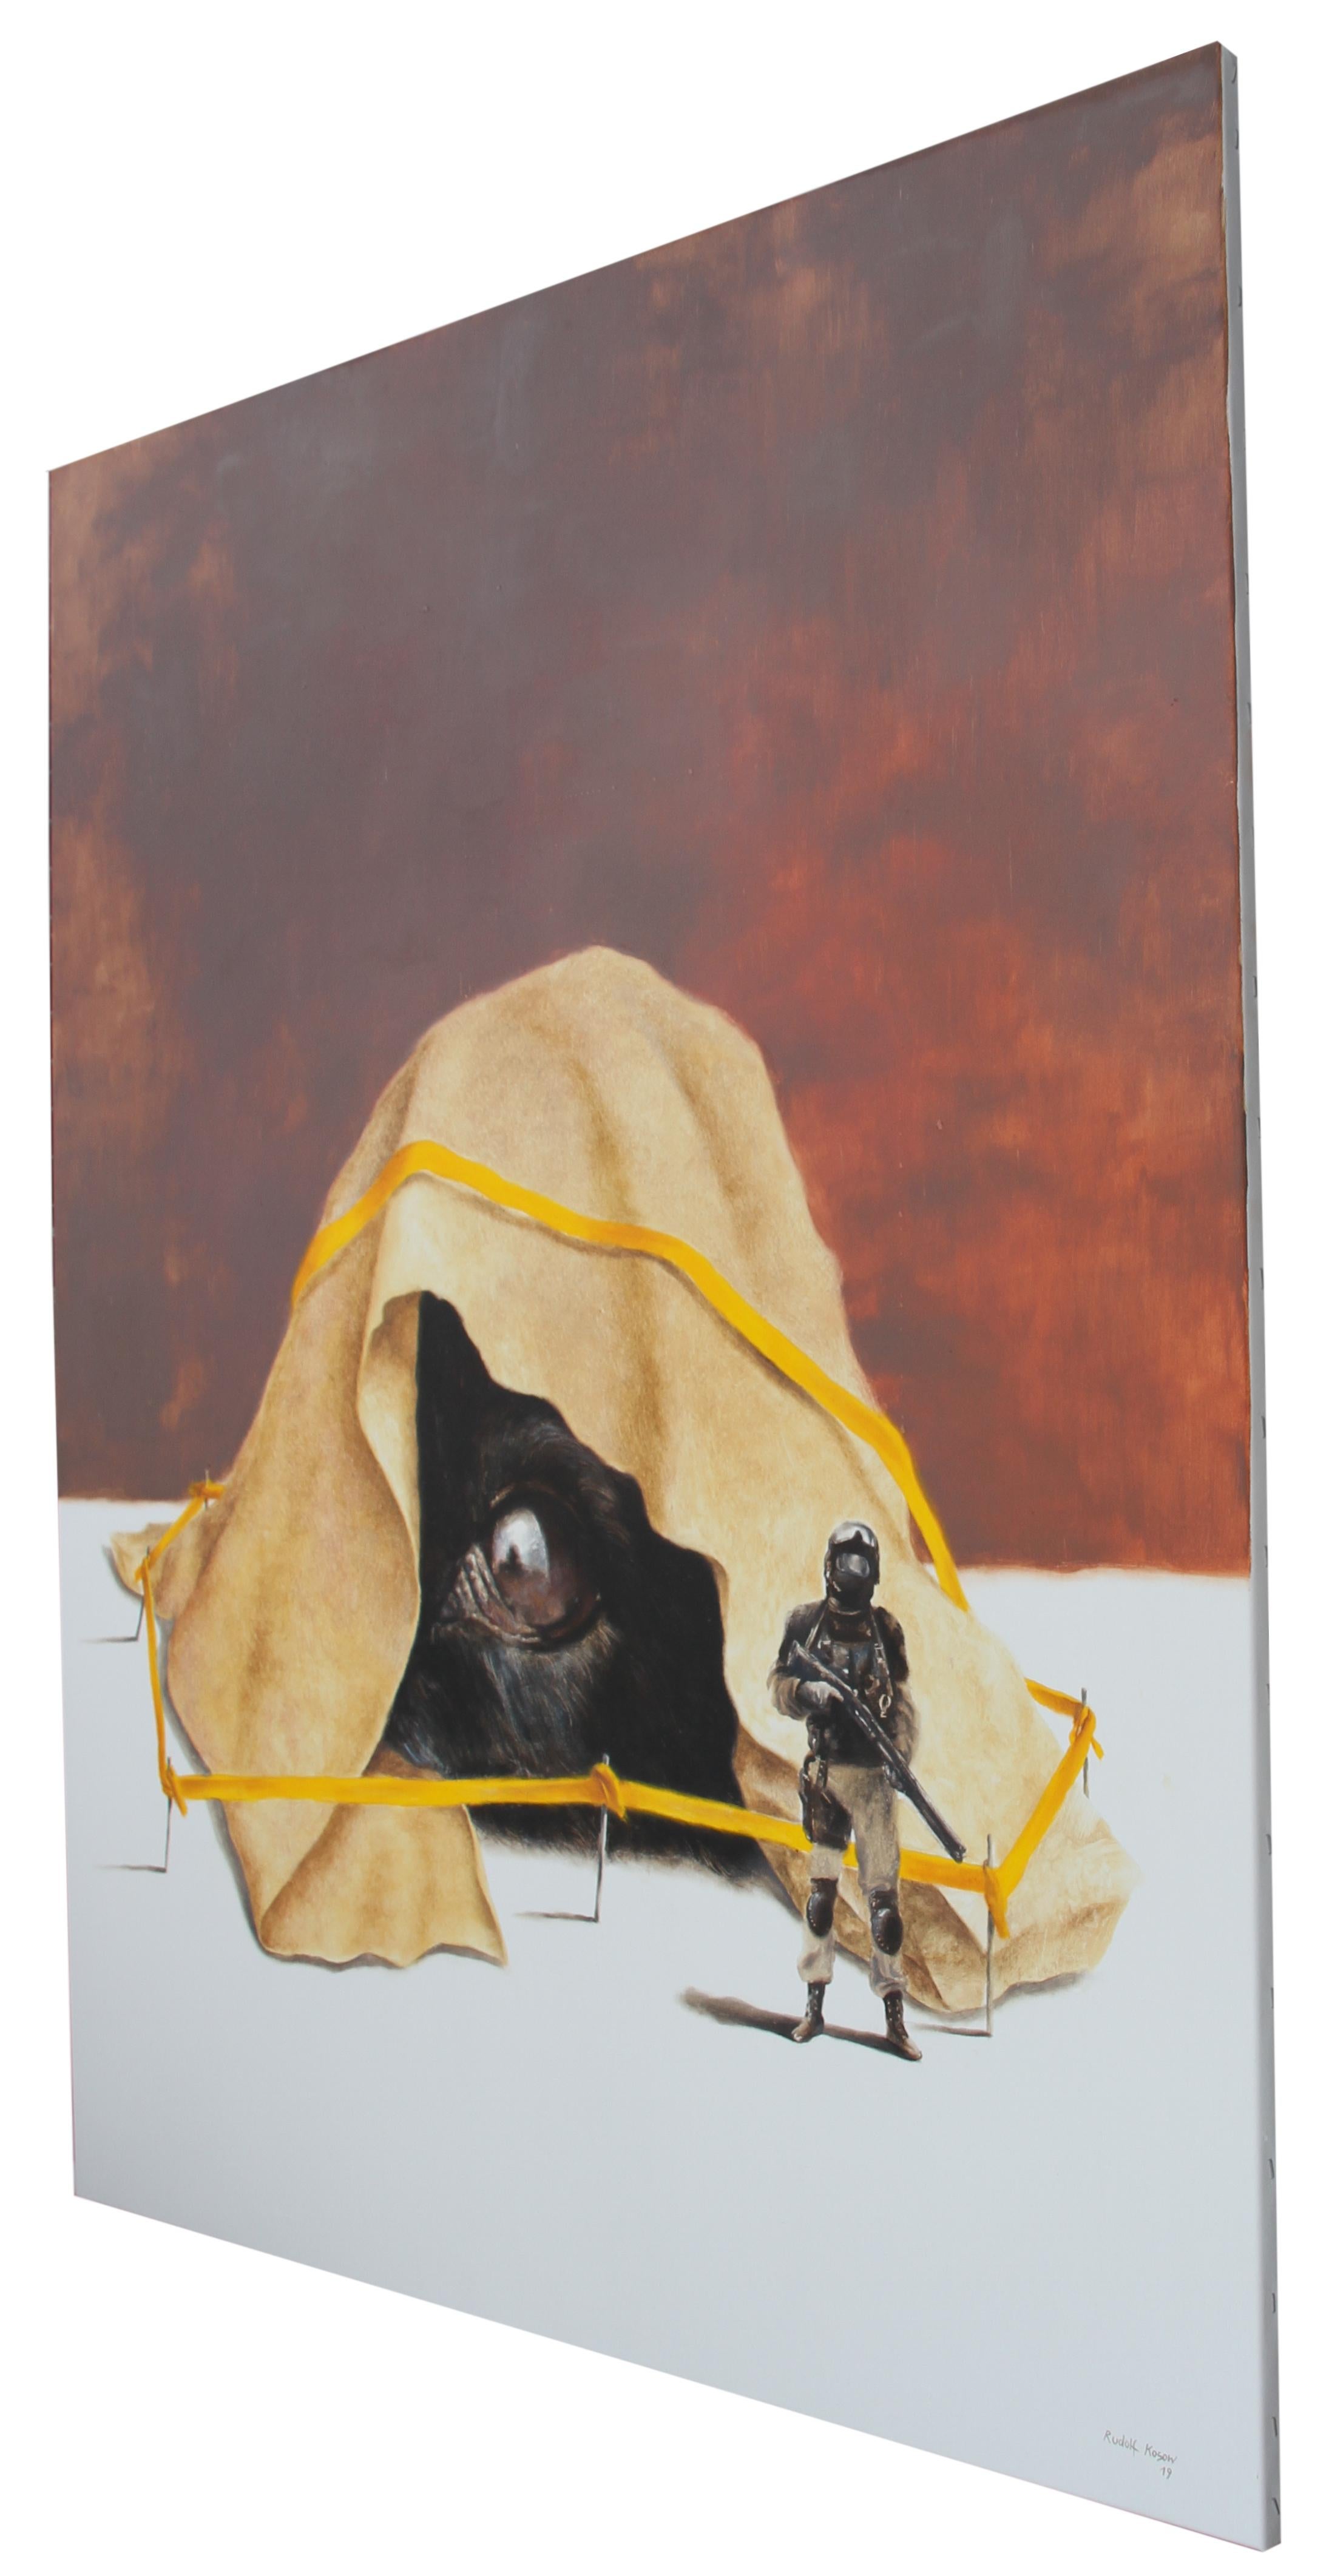 Stranger (dog soldier cop surrealist crime scene oil painting yellow tape) - Painting by Rudolf Kosow